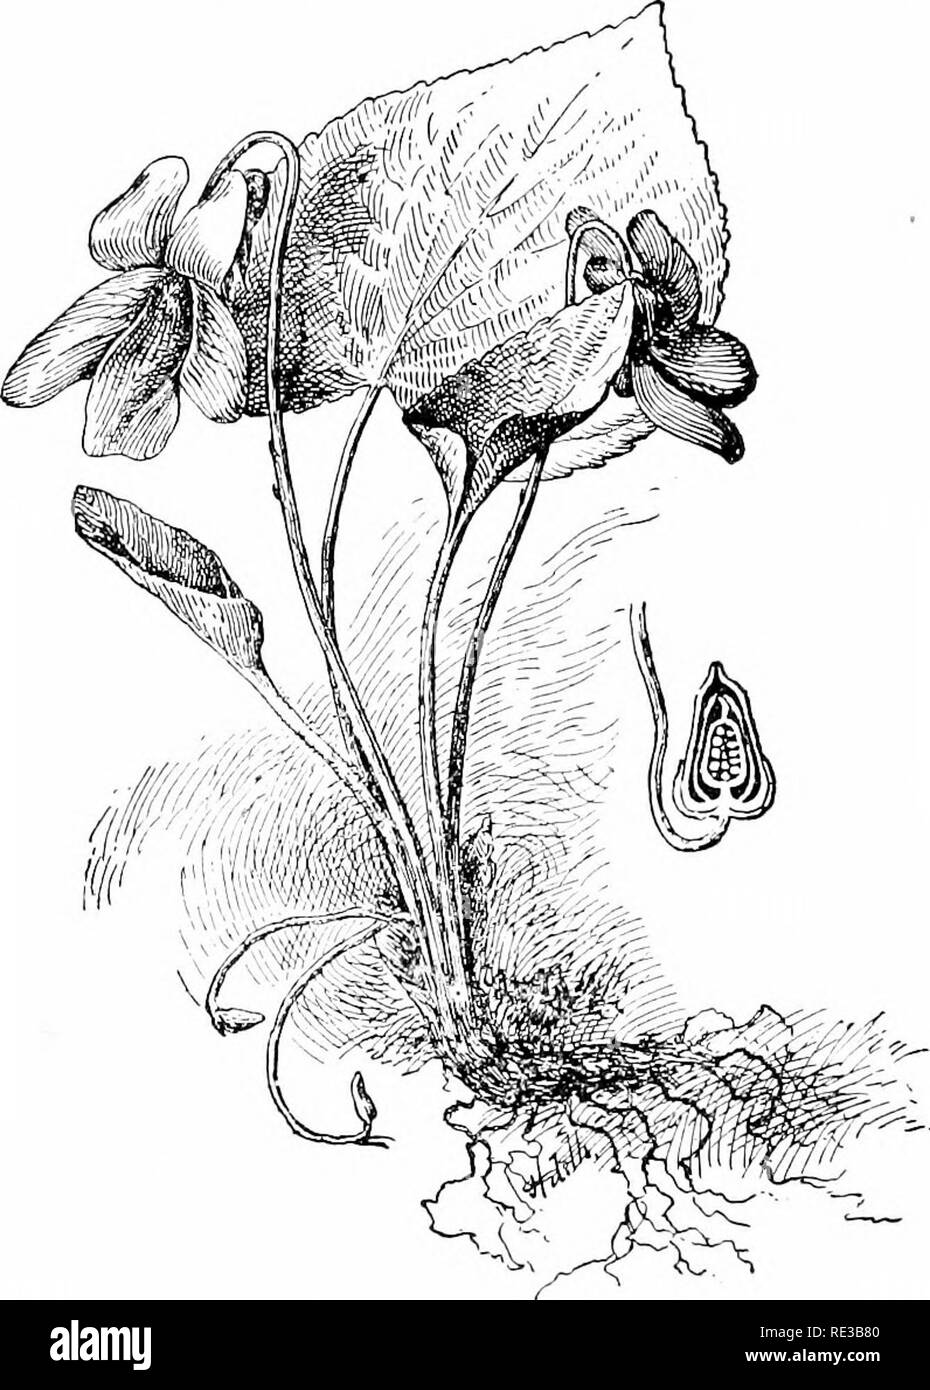 . Elementary botany. Botany. 43^ KELATION TO ENVIRONMENT, i.e. the pollination of the pistil of one flower by pollen from another, is sure to take place, if it is pollinated at all. Even in moncecious plants cross pollination often takes place between flowers of different individuals, so that. Fig. 45+- Viola cucullata; blue flowers above, clcistogamous flowers smaller and cur^'ed below Section nf pistil at right. more wiilely different stocks are united in the fertilized egg, and the strain is kept mure vigorous than if very close or identical strains were united. 848. i hit there are many fl Stock Photo